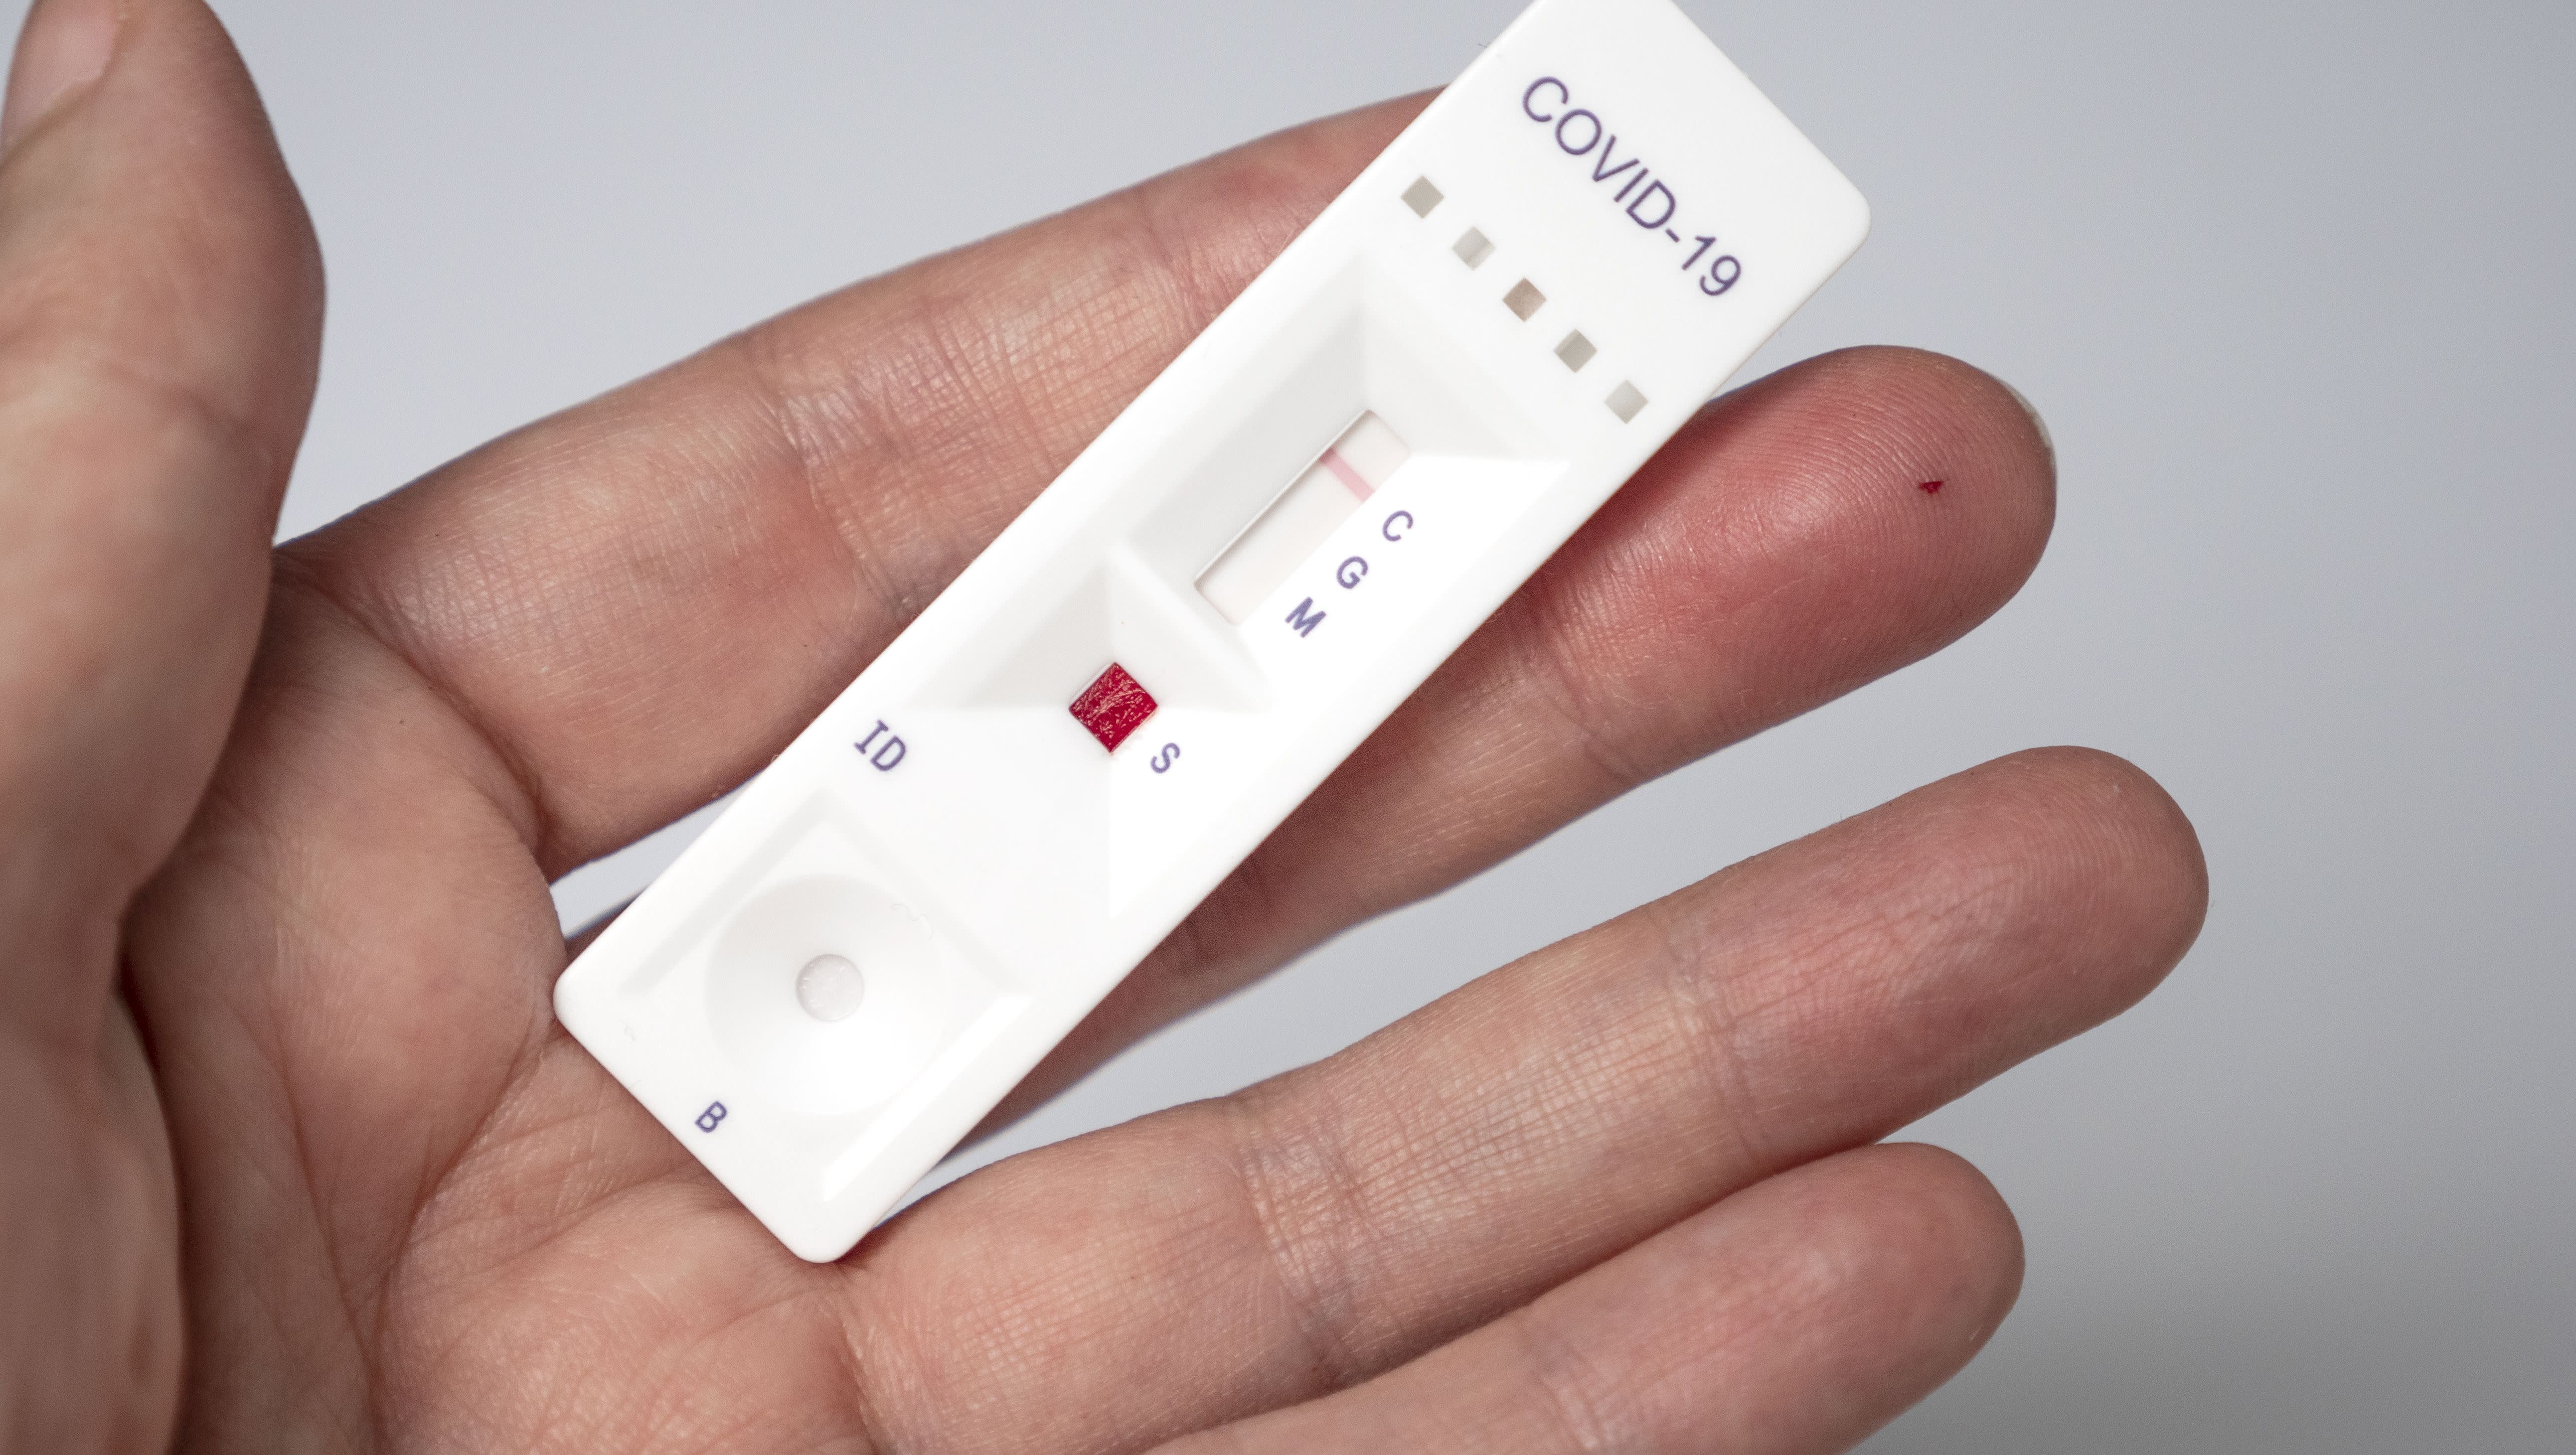 everlywell-s-fda-authorized-covid-19-test-kit-launches-video